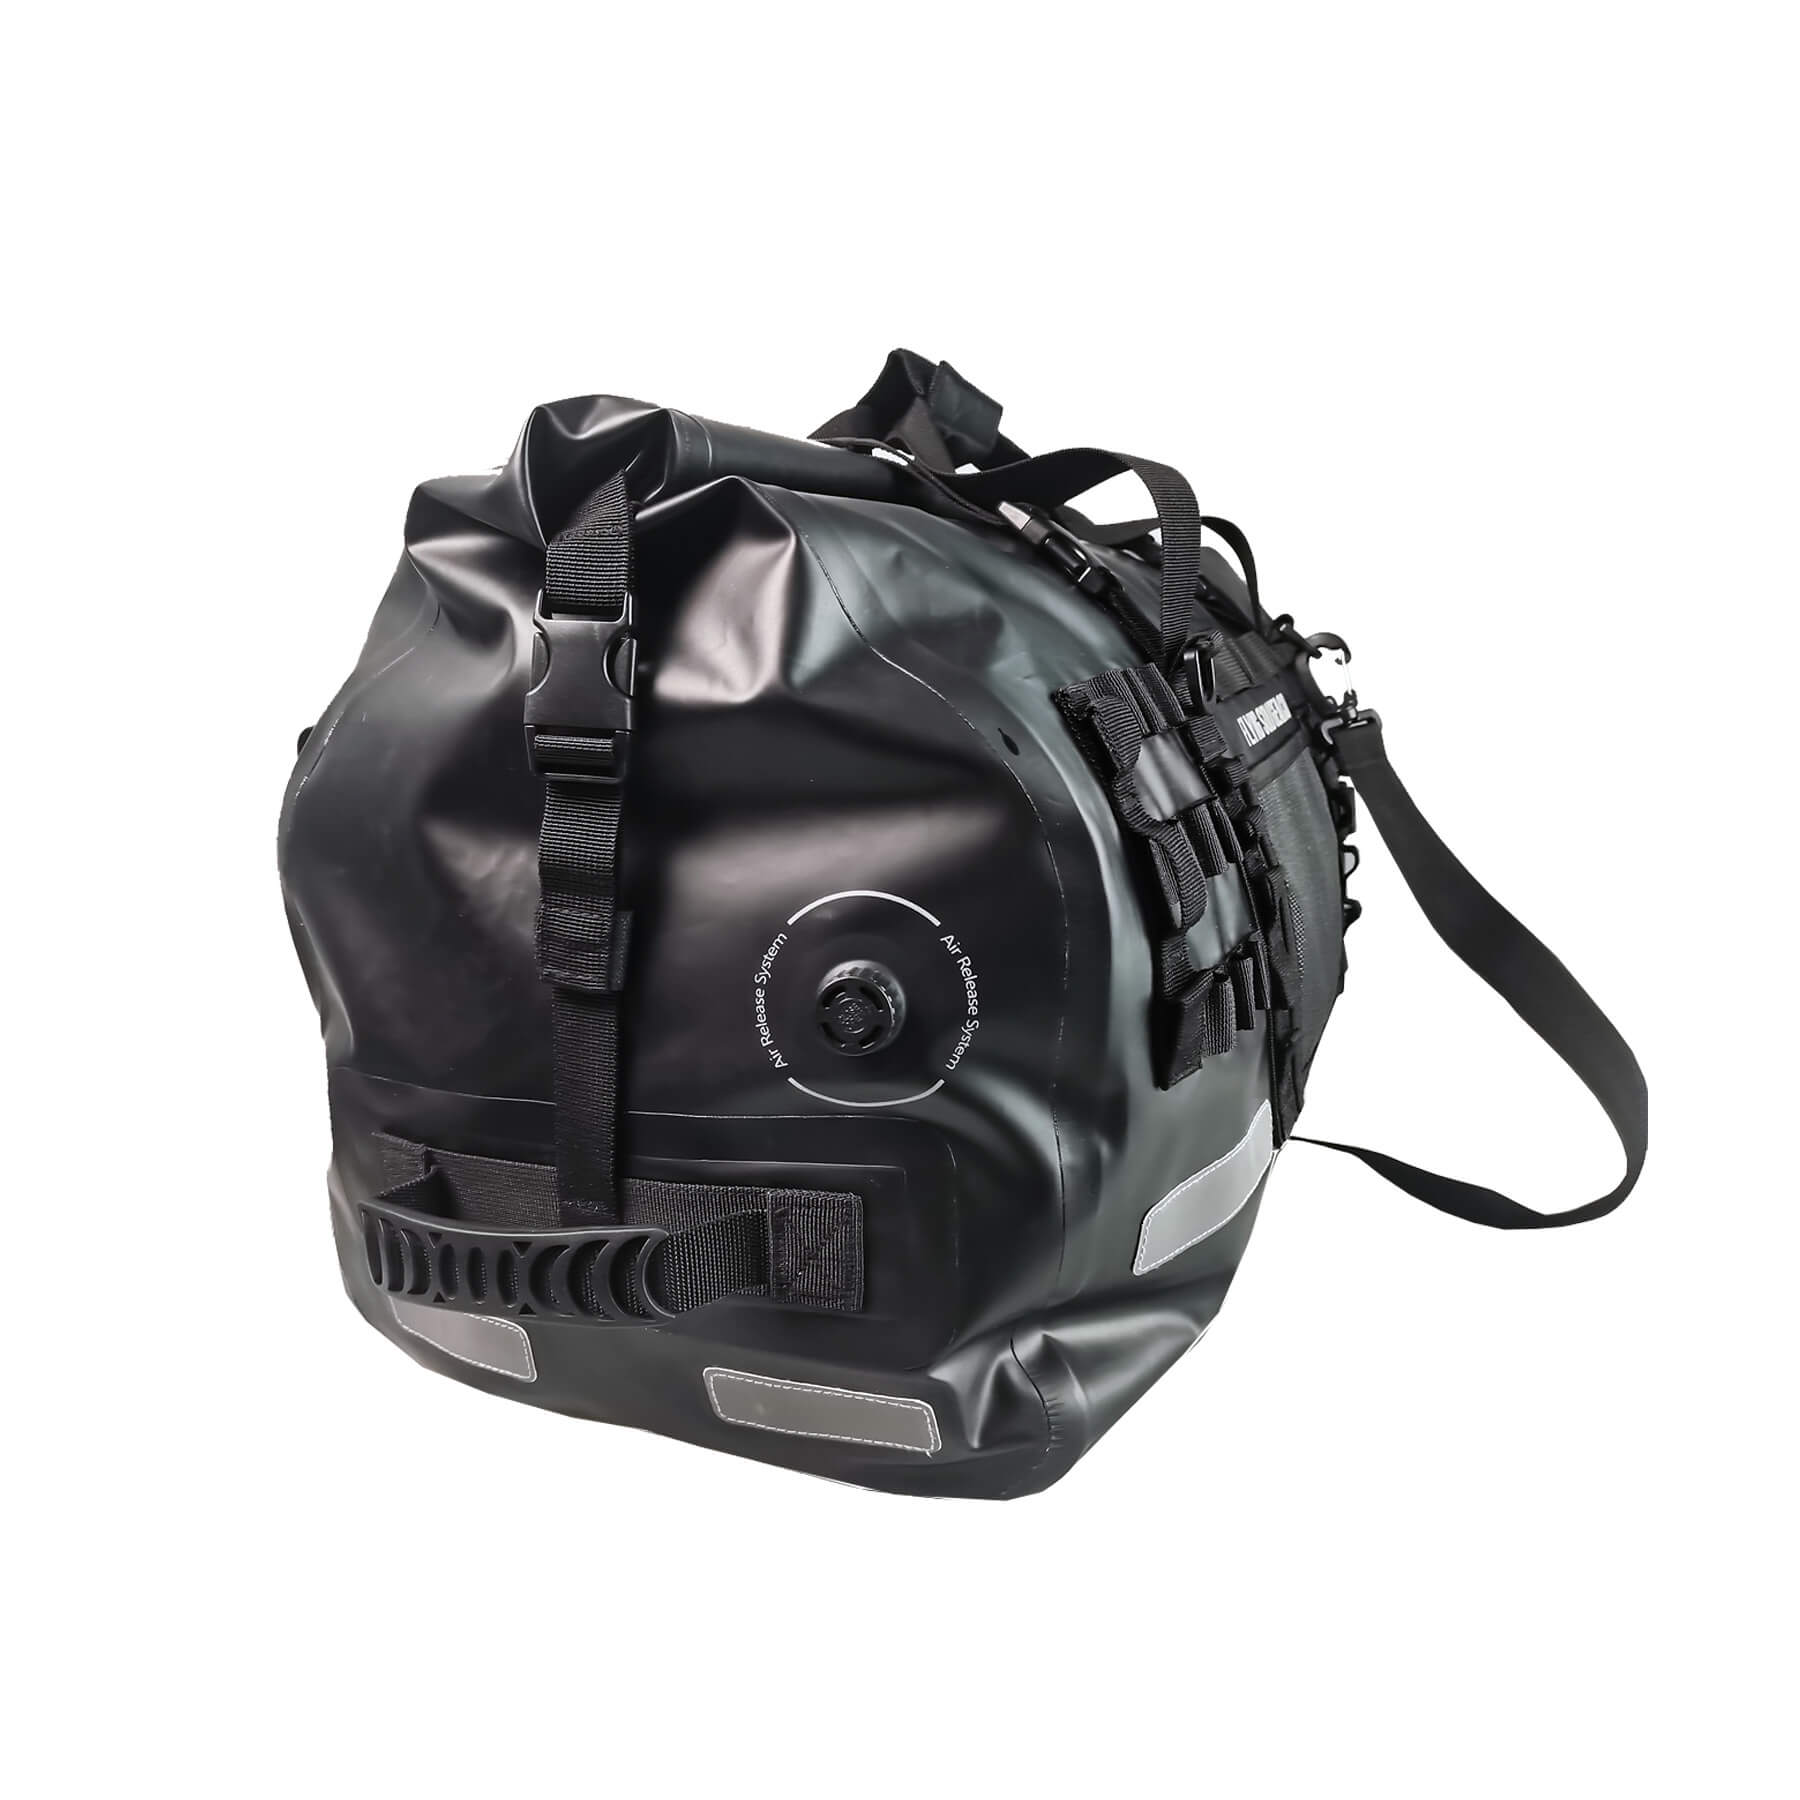 Tully Waterproof Tailbags